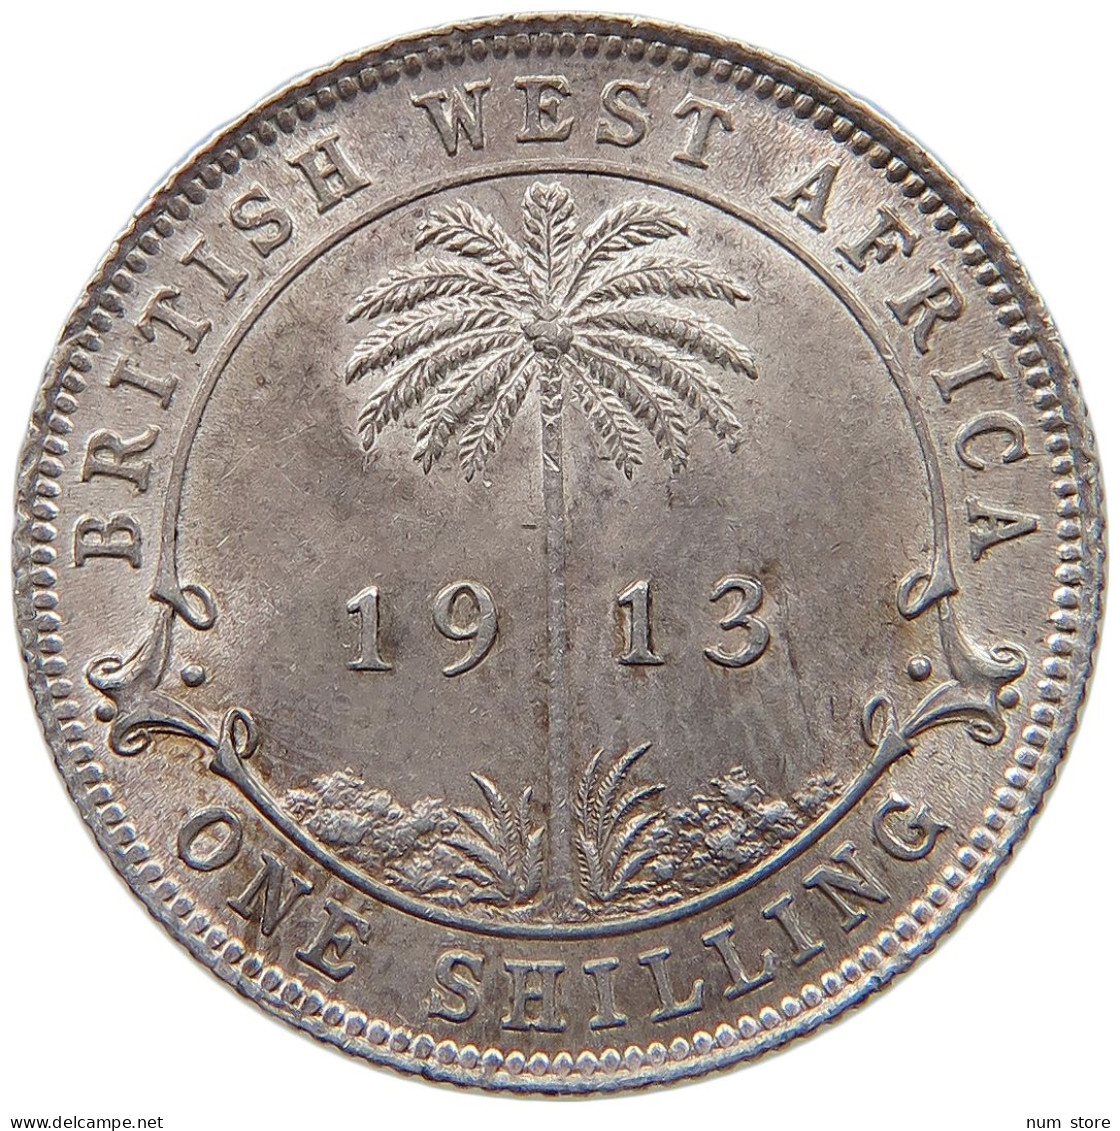 WEST AFRICA SHILLING 1913 George V. (1910-1936) #t111 1123 - Collezioni